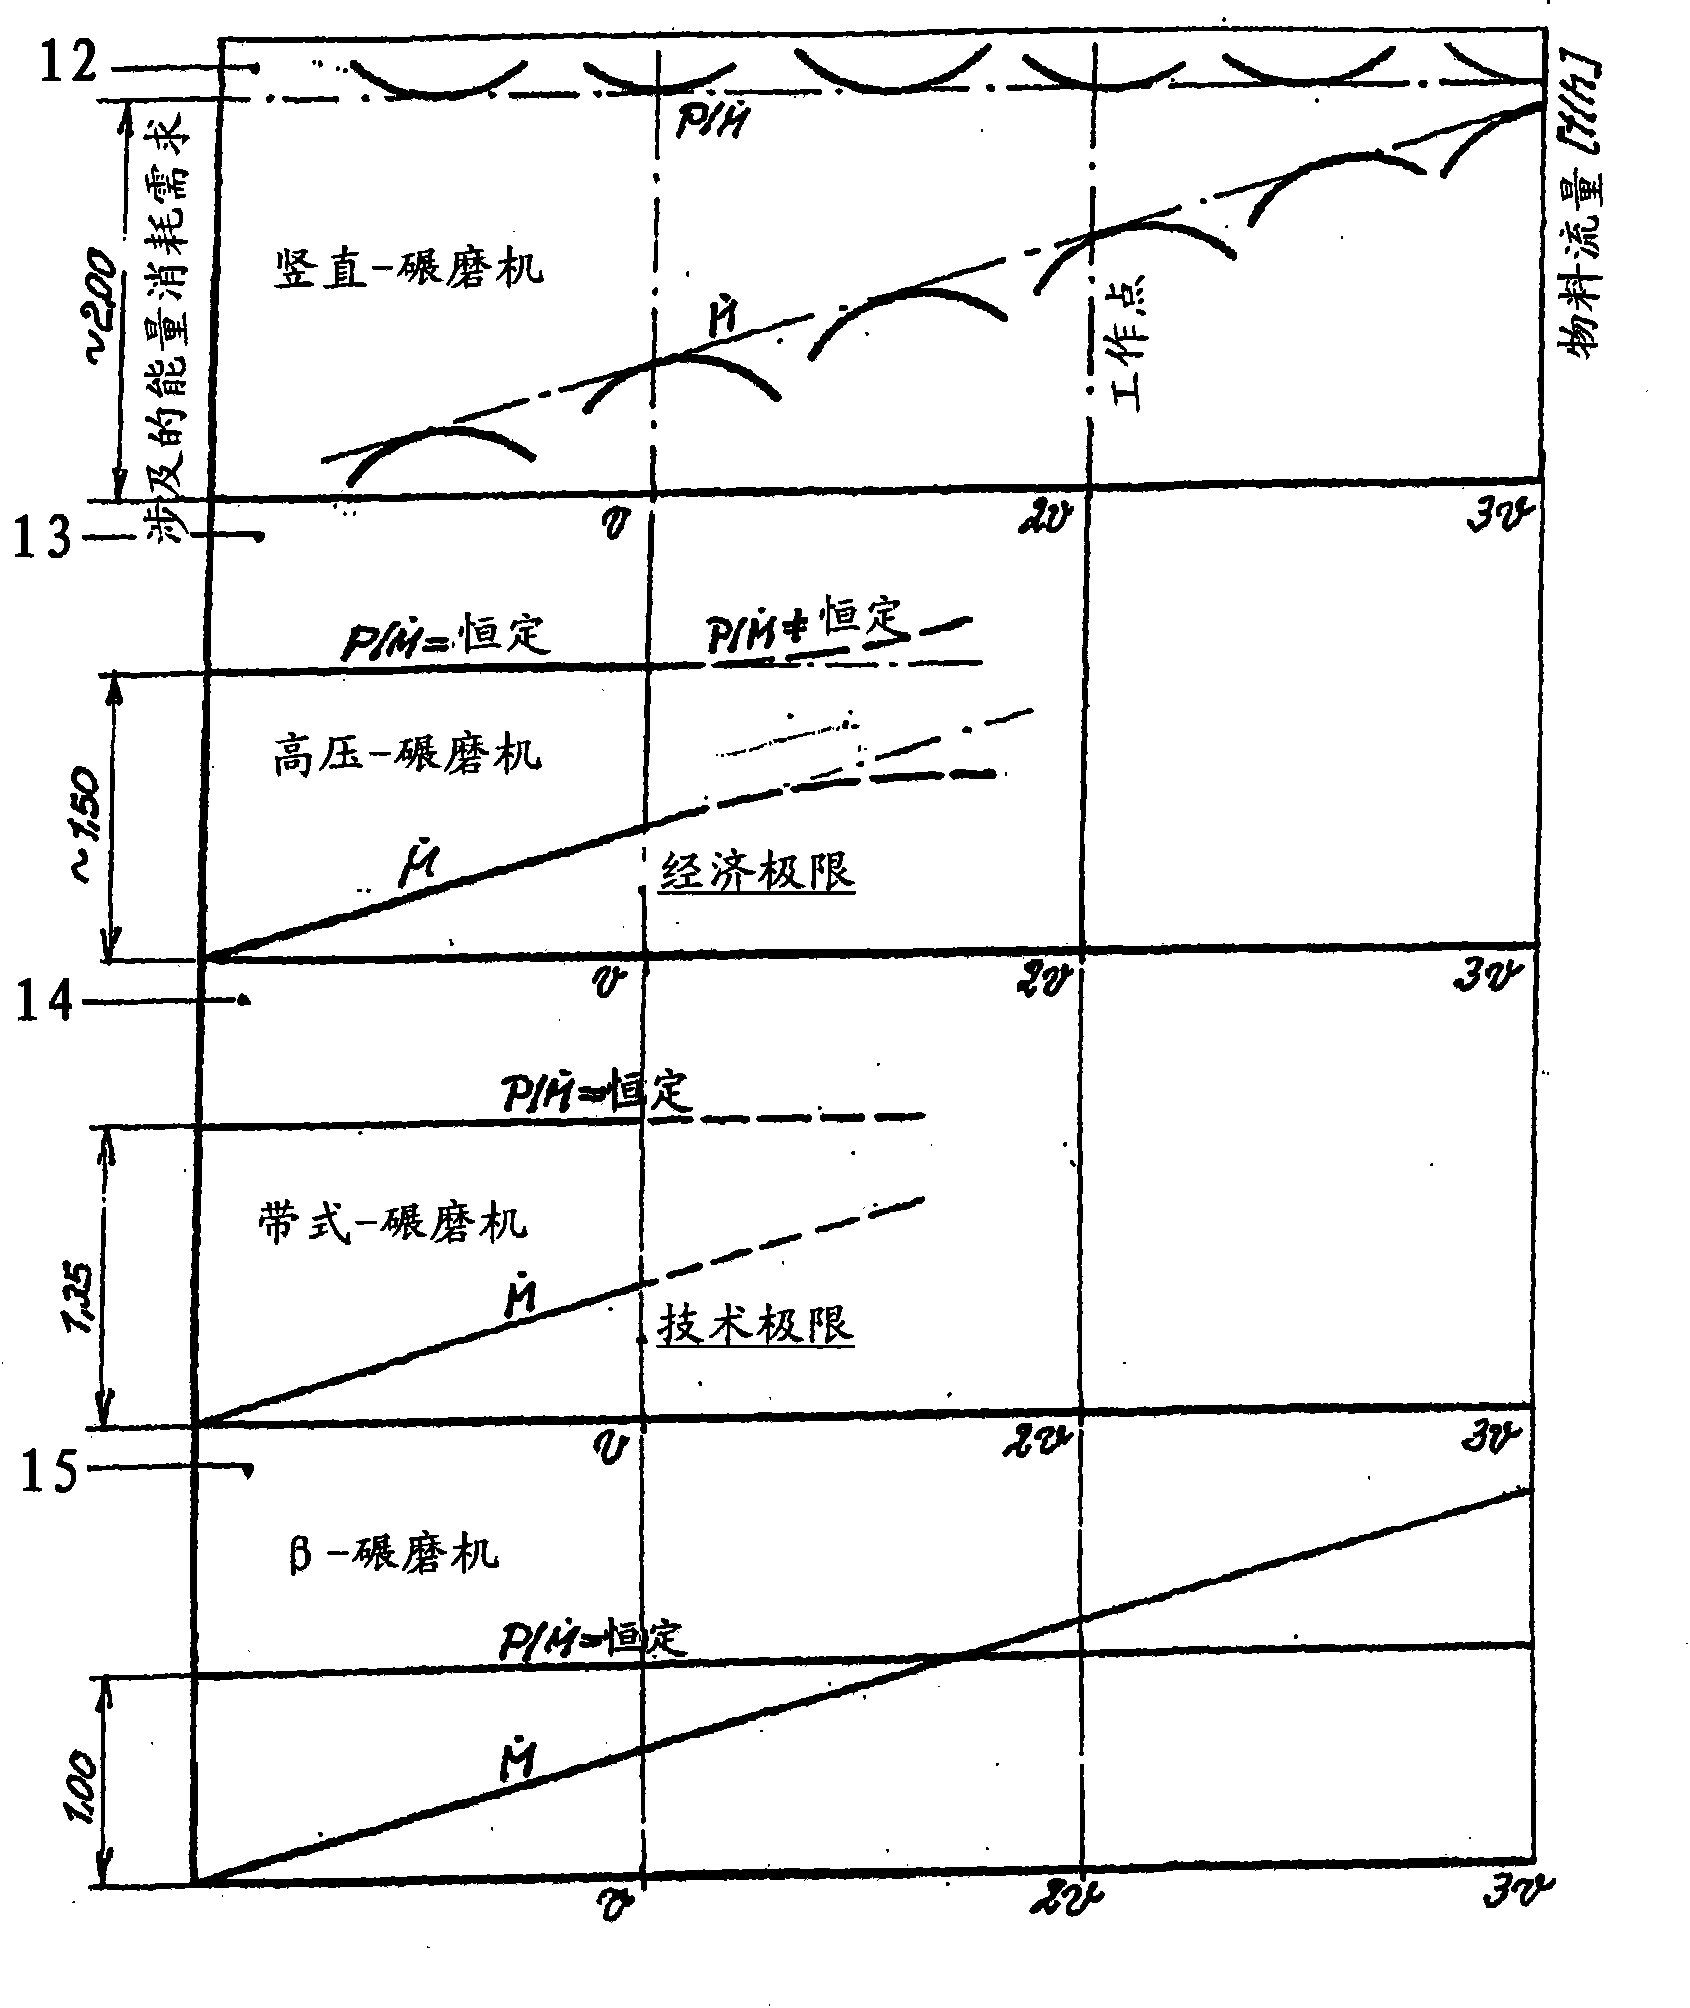 Method of, and apparatus for, the preliminary grinding and finishing of mineral and non-mineral materials